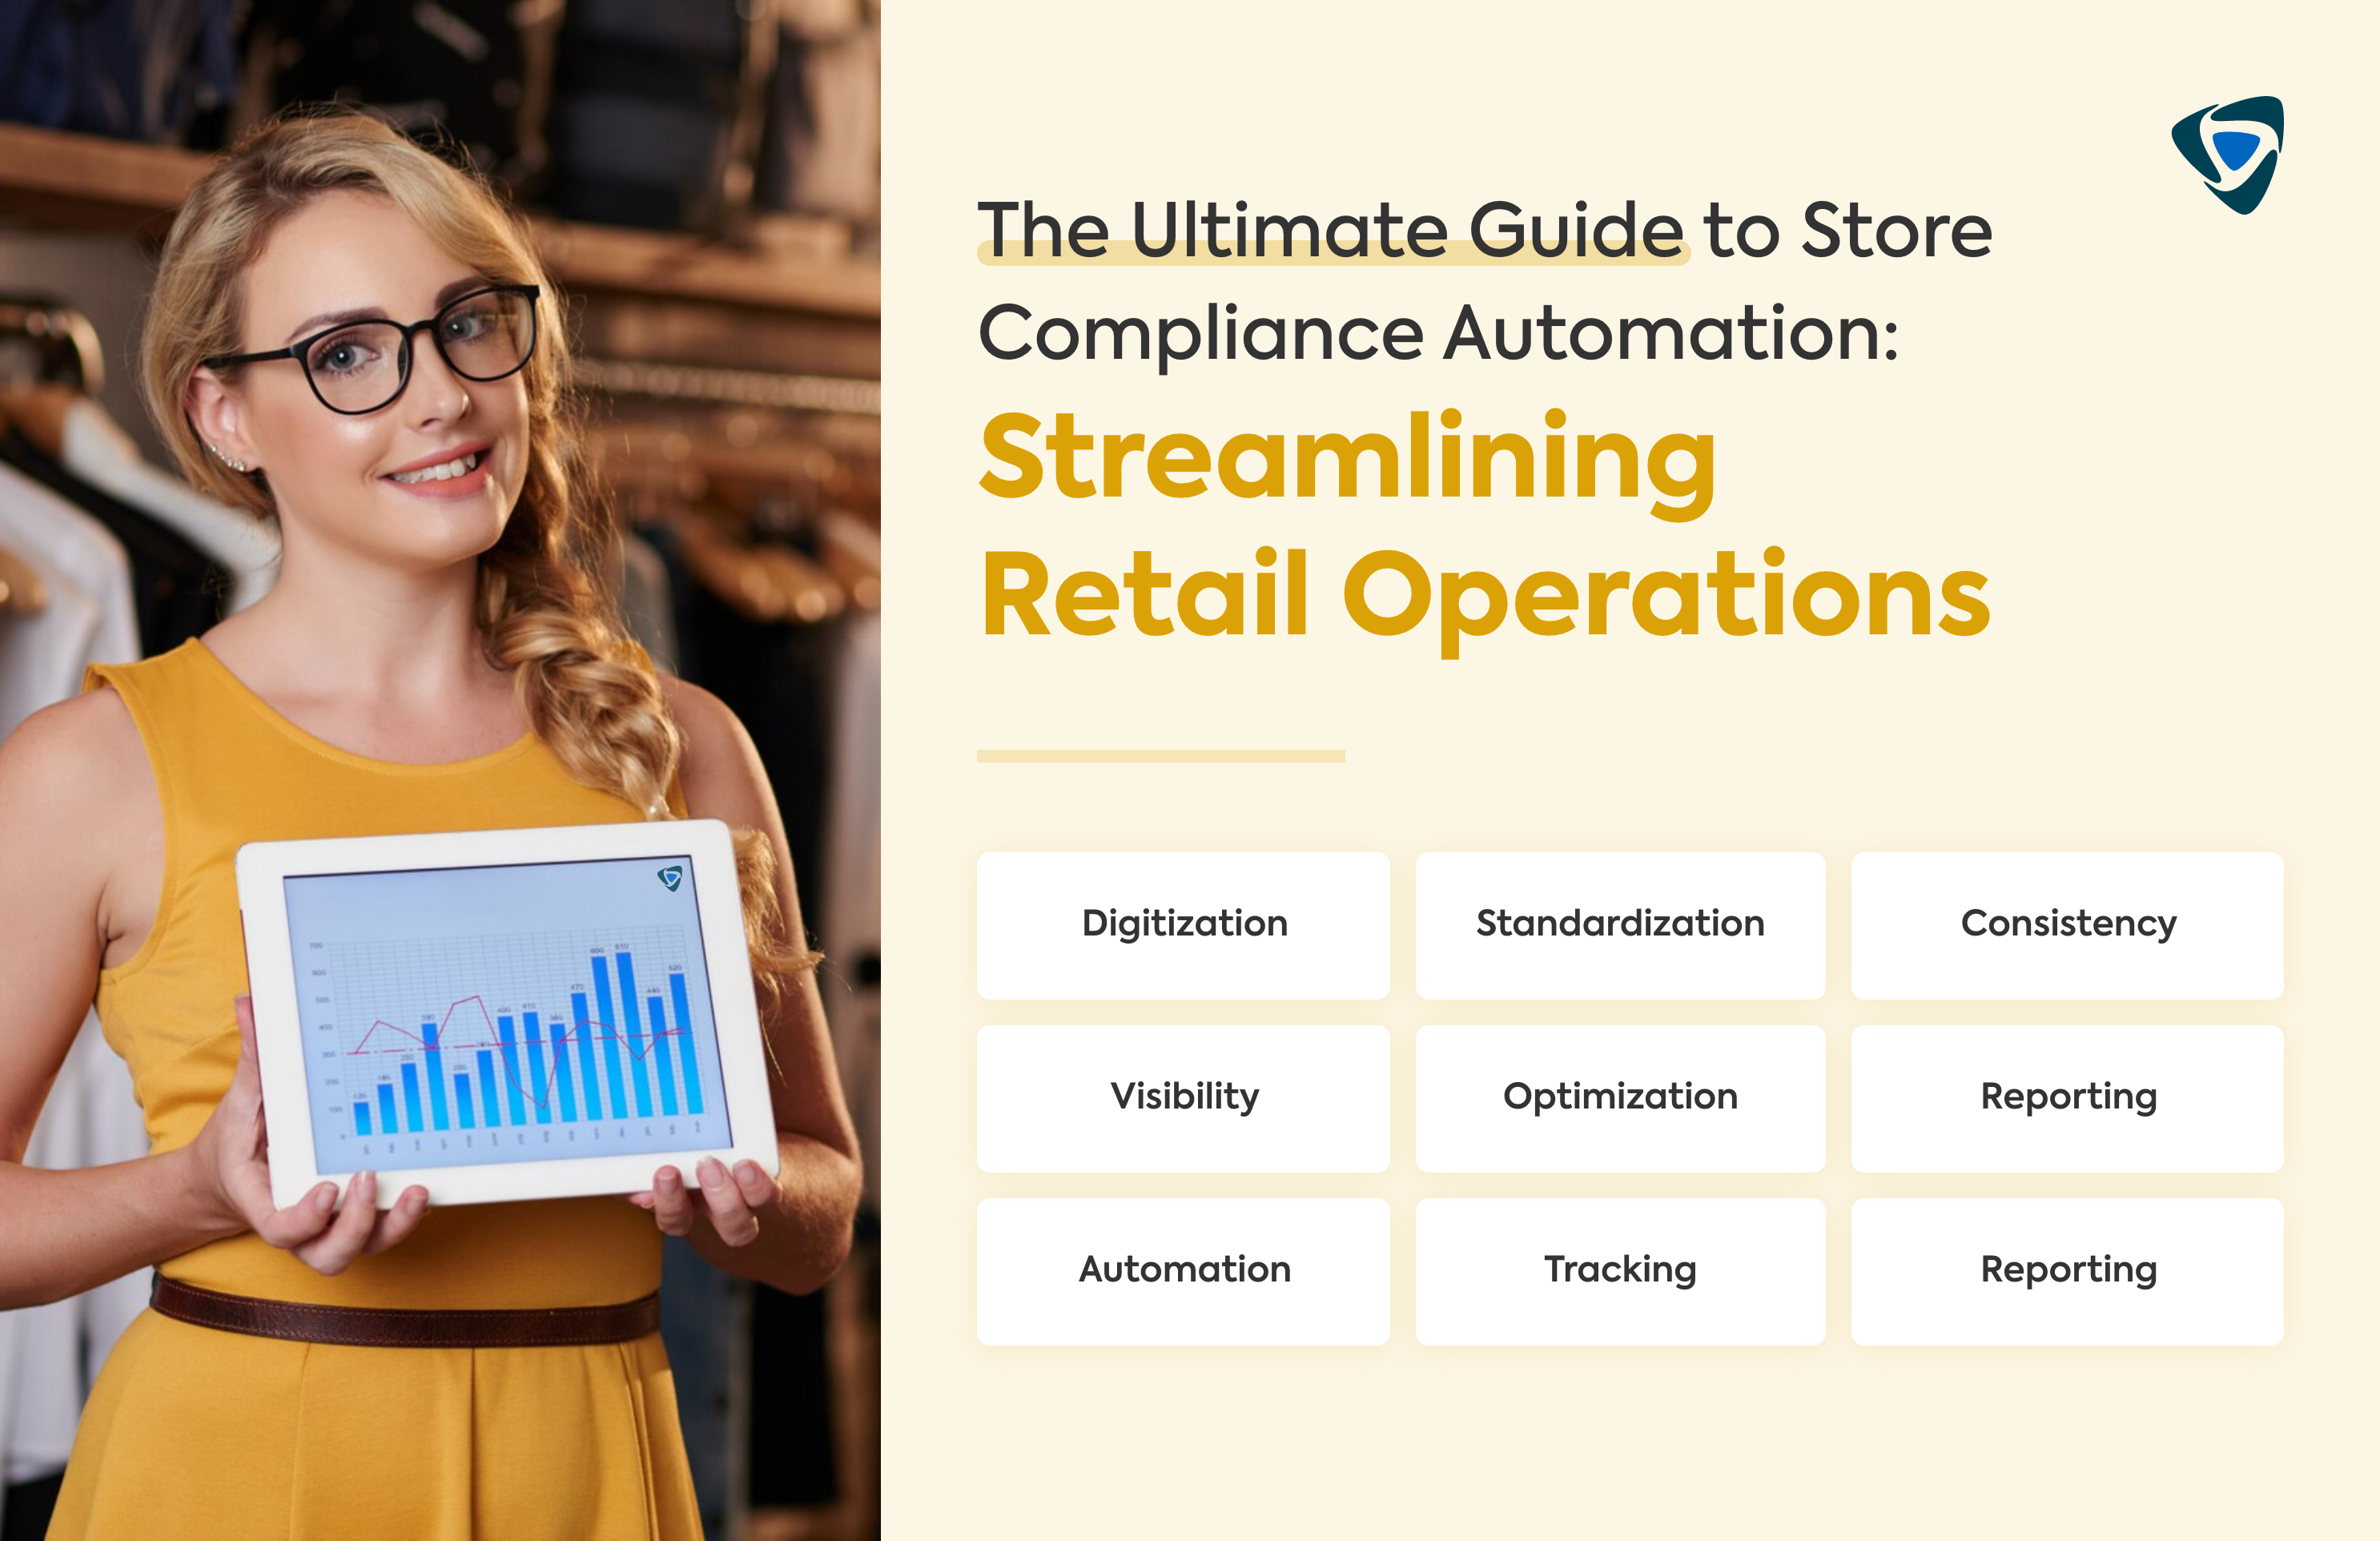 The Ultimate Guide to Store Compliance Automation: Streamlining Retail Operations